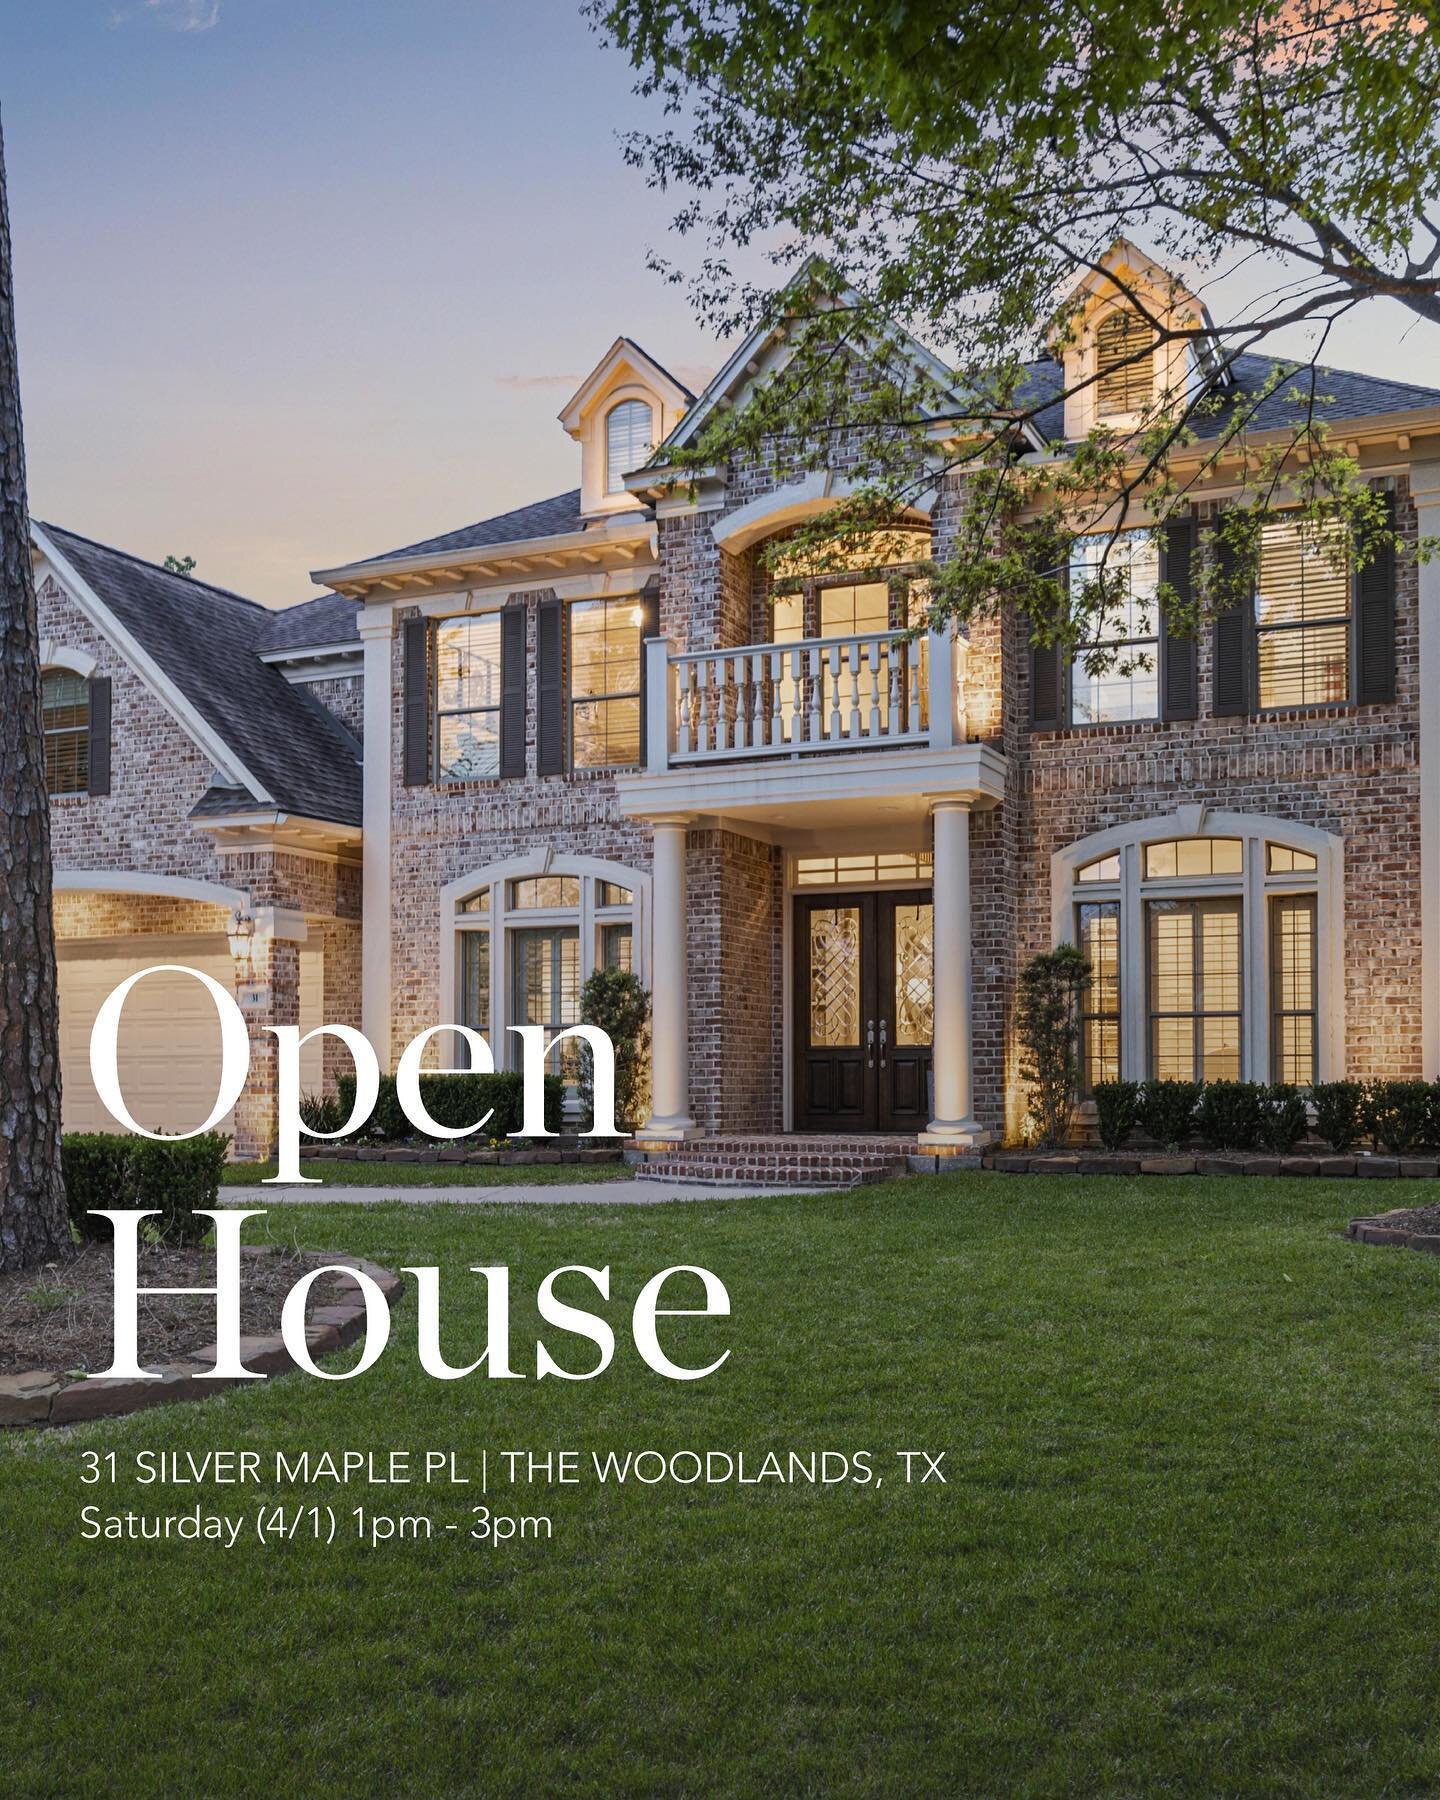 🚨 Today&rsquo;s Open House!

✨Curb appeal, location, quality and neighborhood are all five stars on this magnificent custom home in Old Sterling.

✨Meticulously cared for by the owners, the home features wood floors throughout, LED lighting, all bri